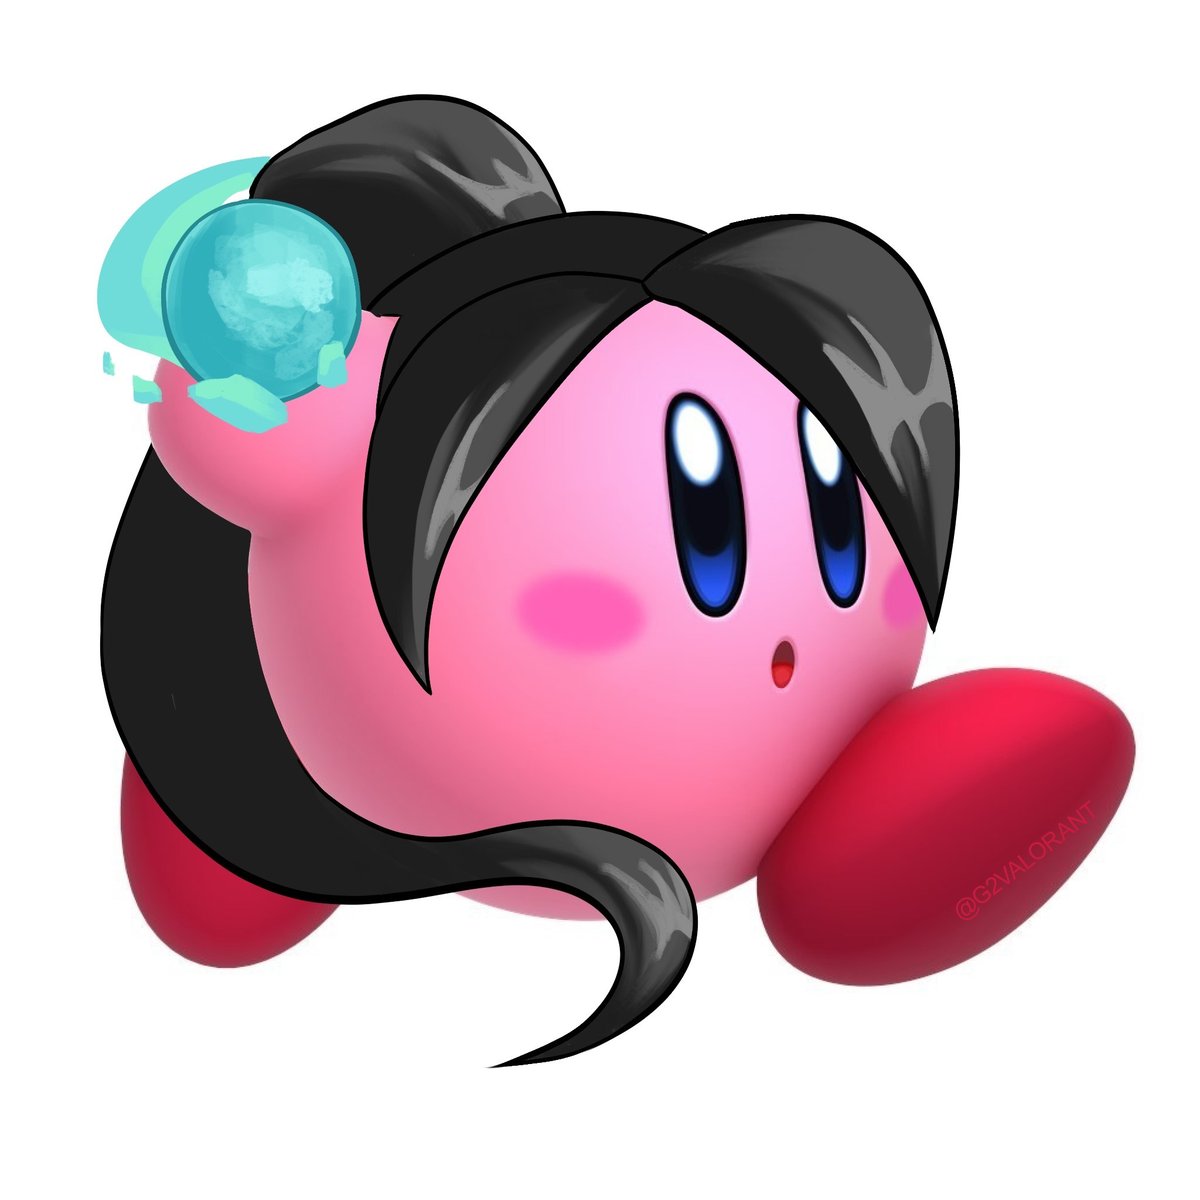 Kirby if he swallowed VALORANT agents, a thread 🧵